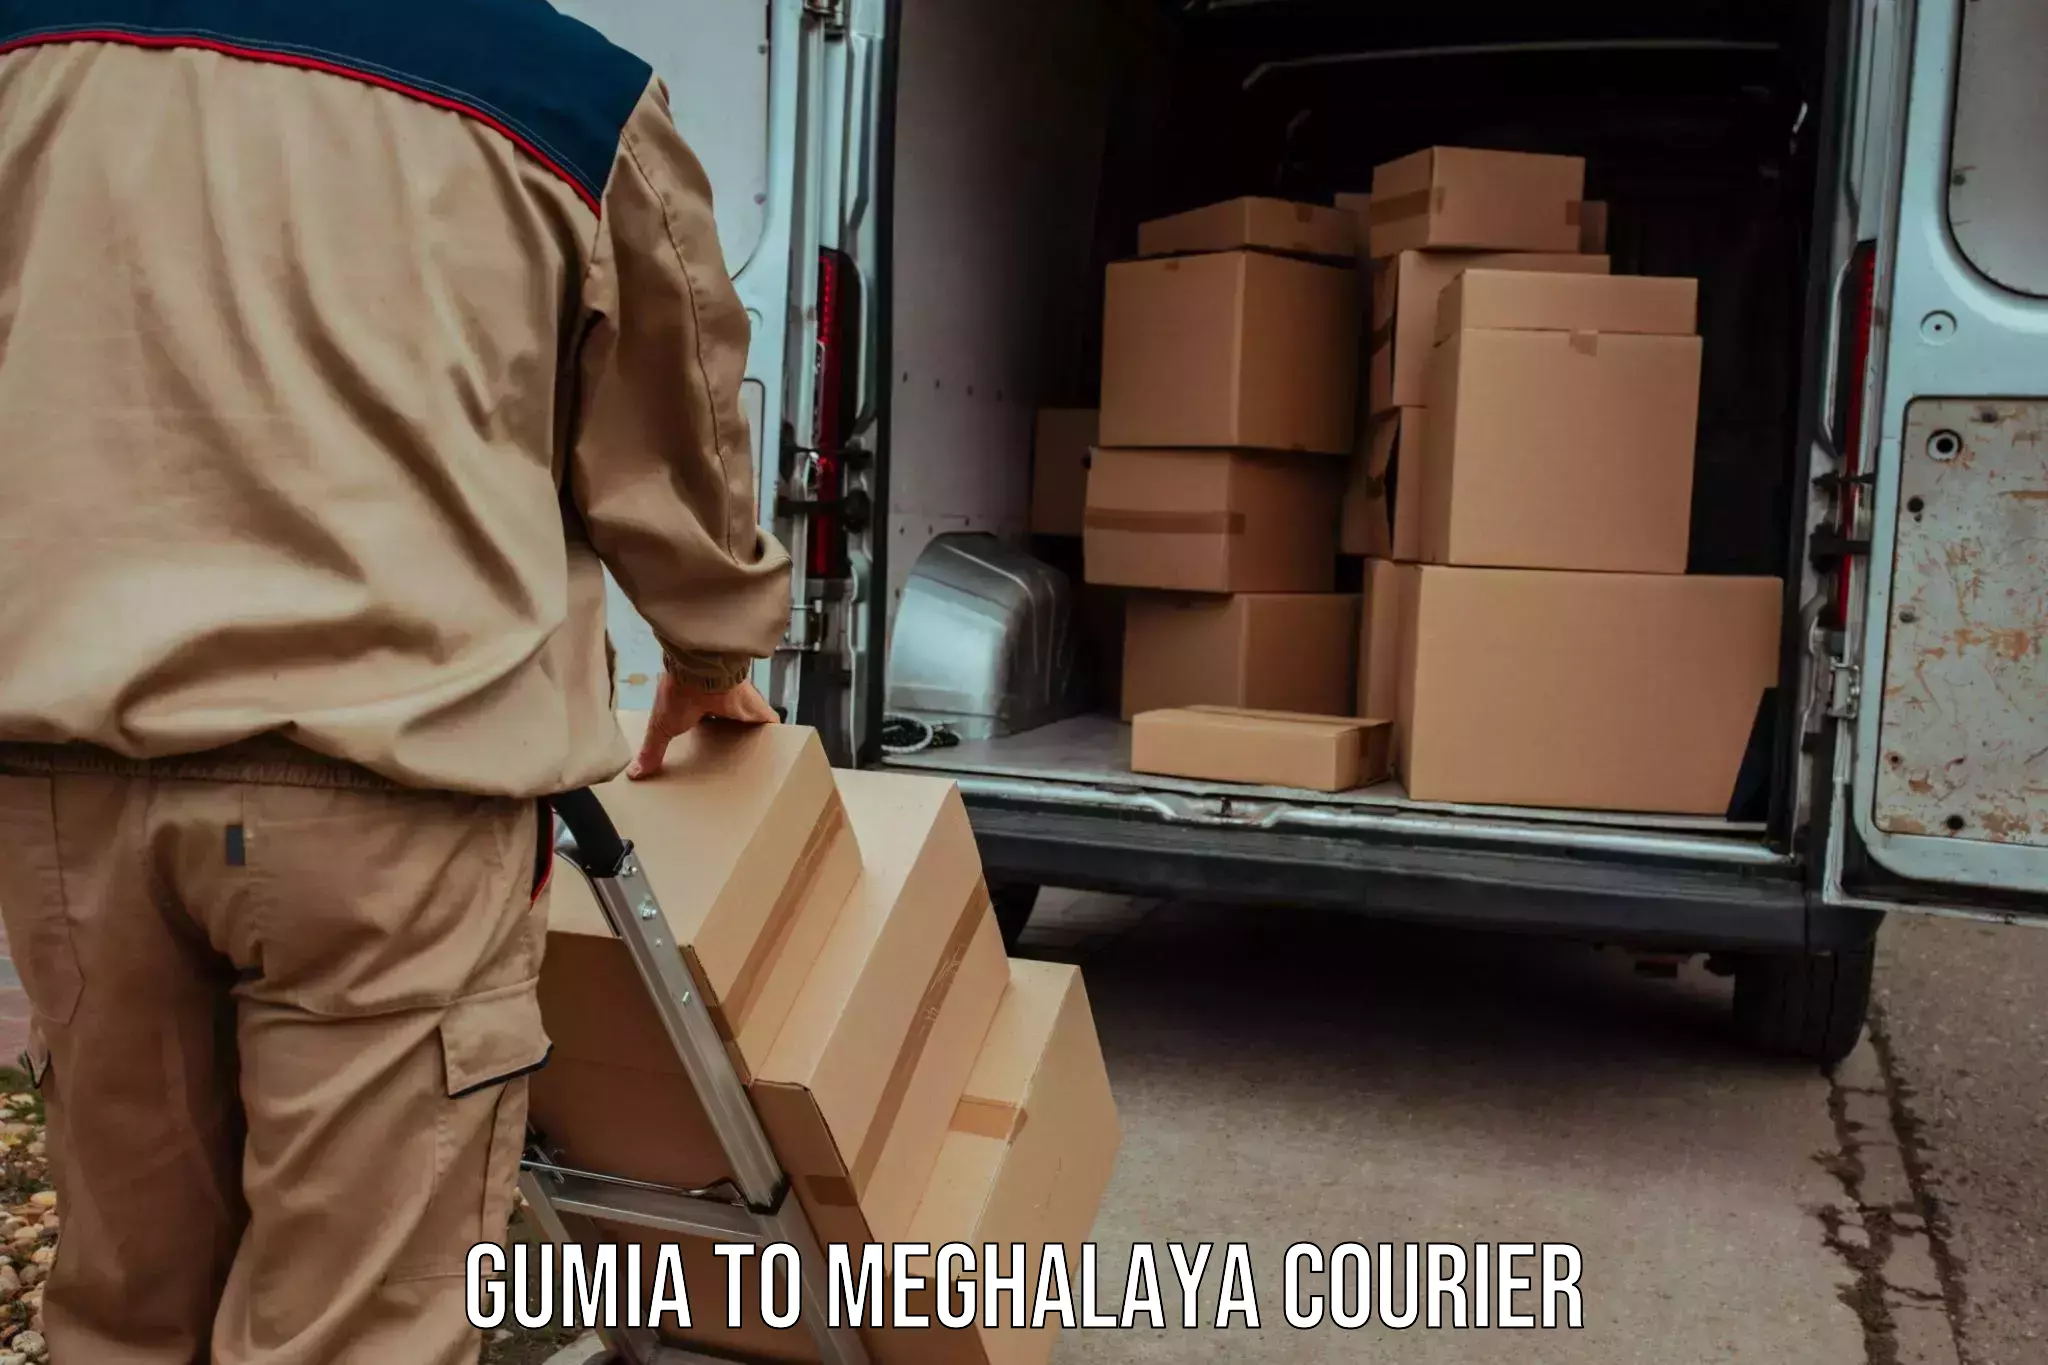 Next-day delivery options Gumia to Umsaw